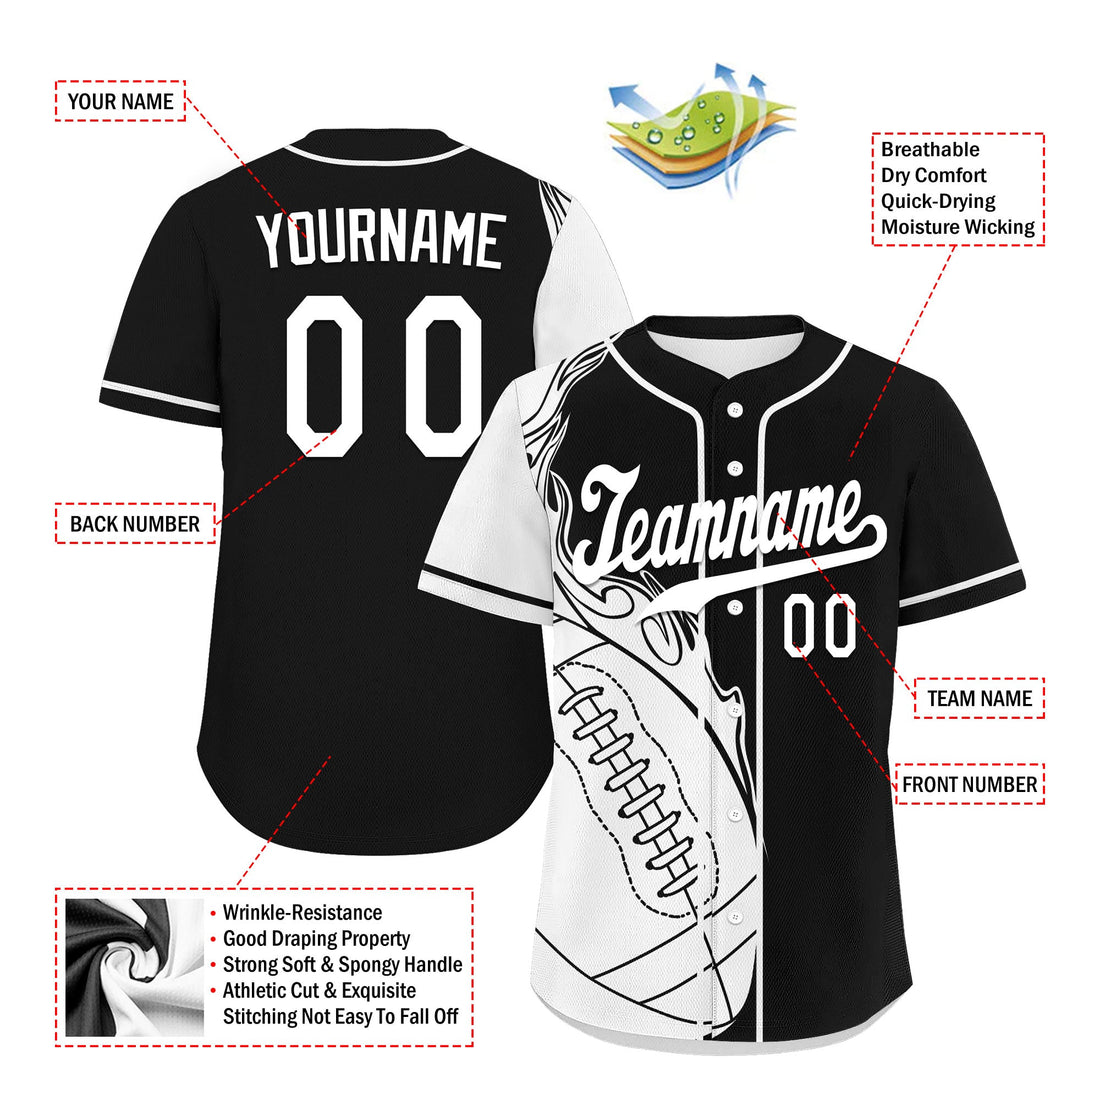 Custom Black White Classic Style Personalized Authentic Baseball Jersey UN002-D0b0a00-a9